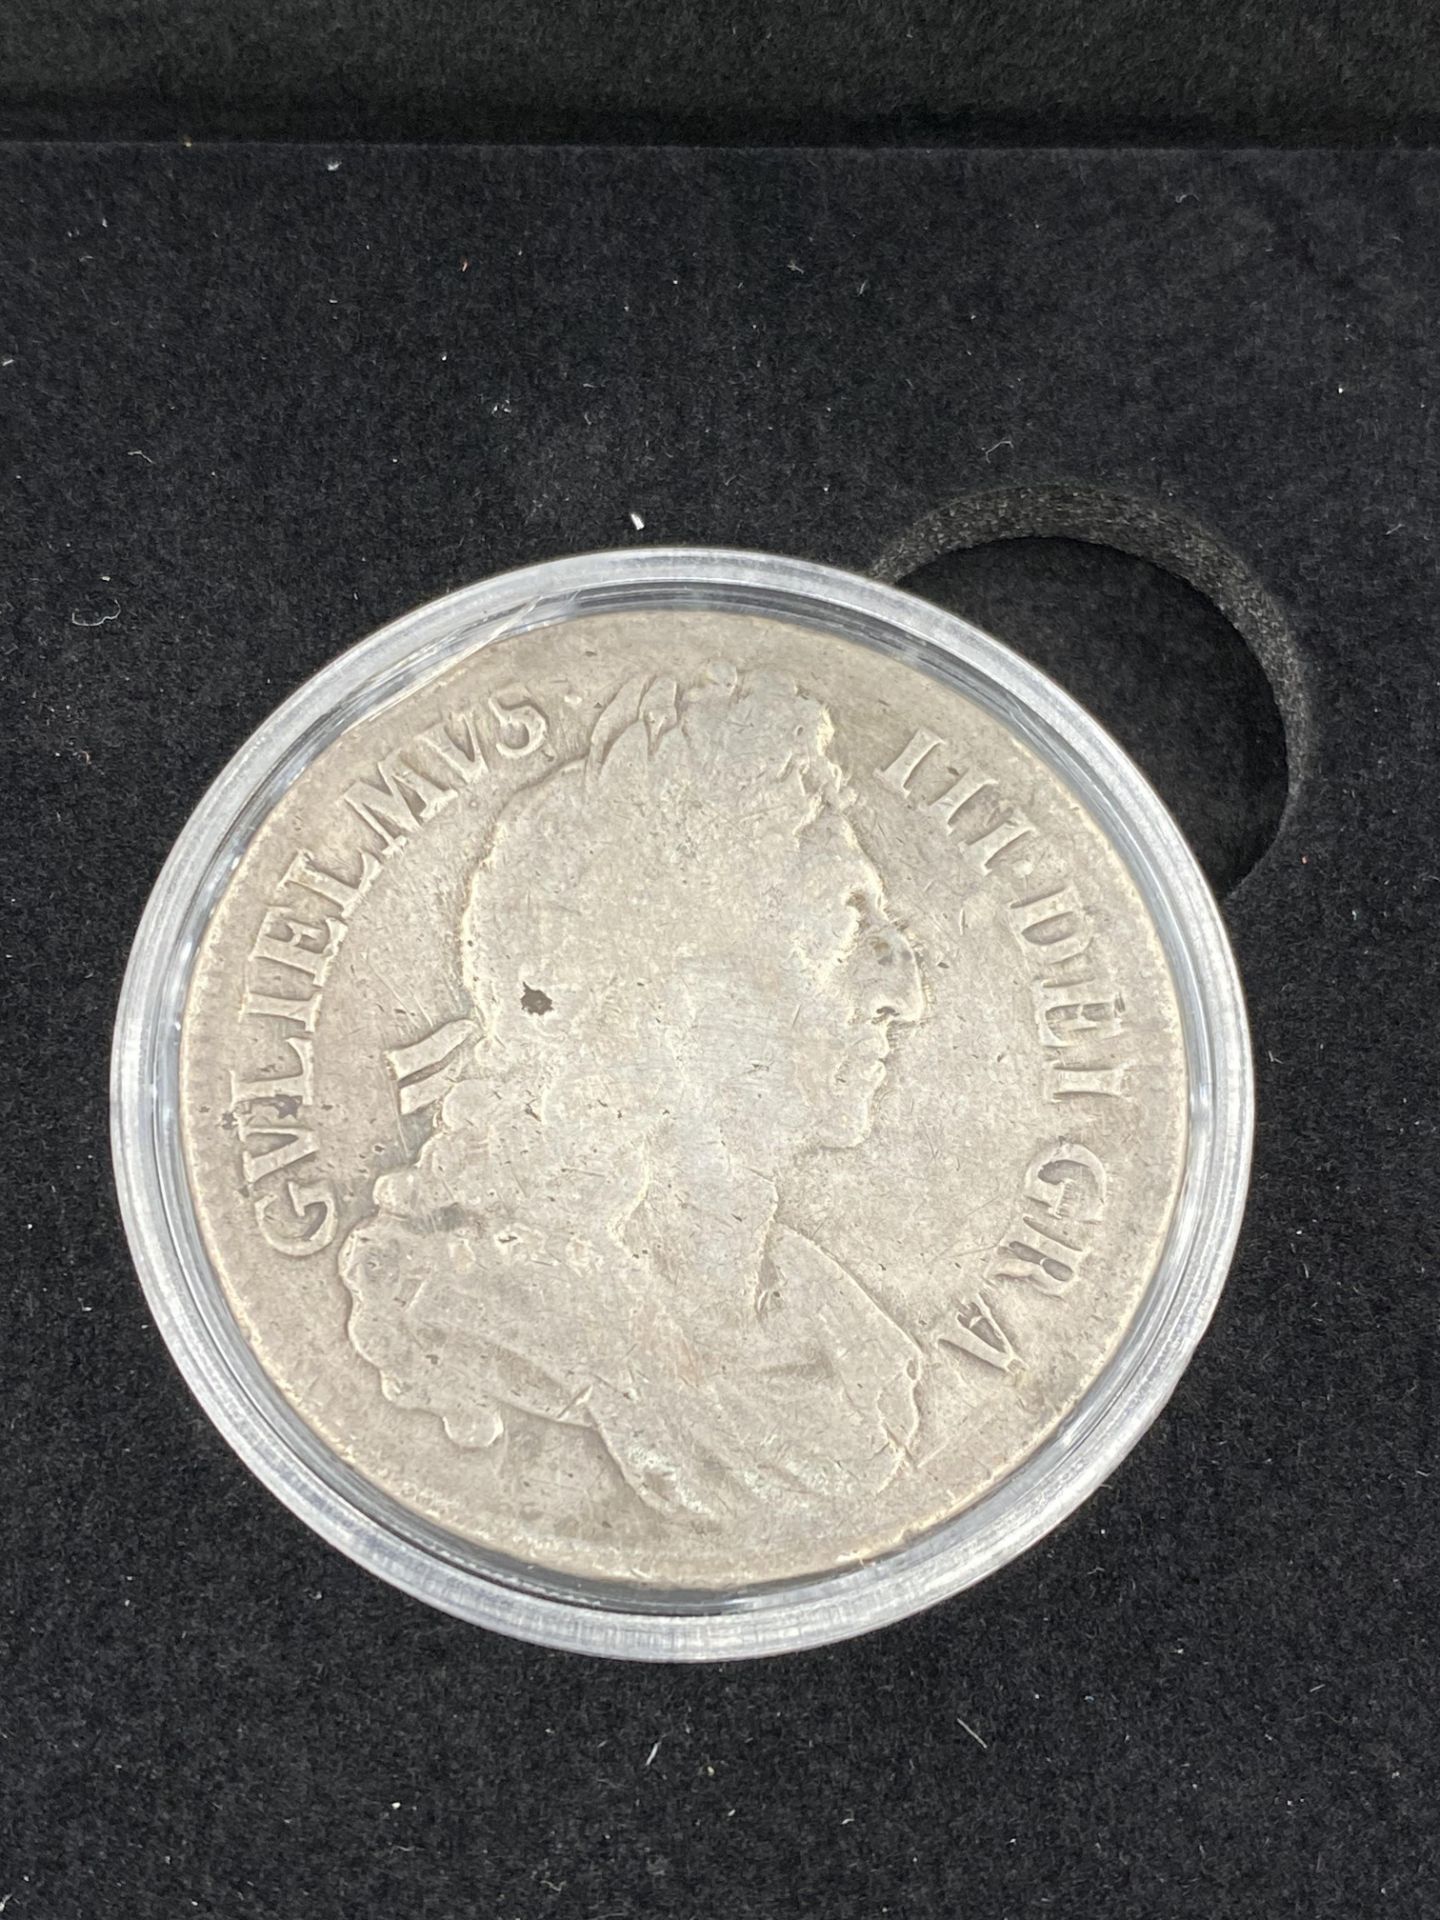 William III silver crown, 1696, boxed with Westminster certificate of authenticity - Image 3 of 3